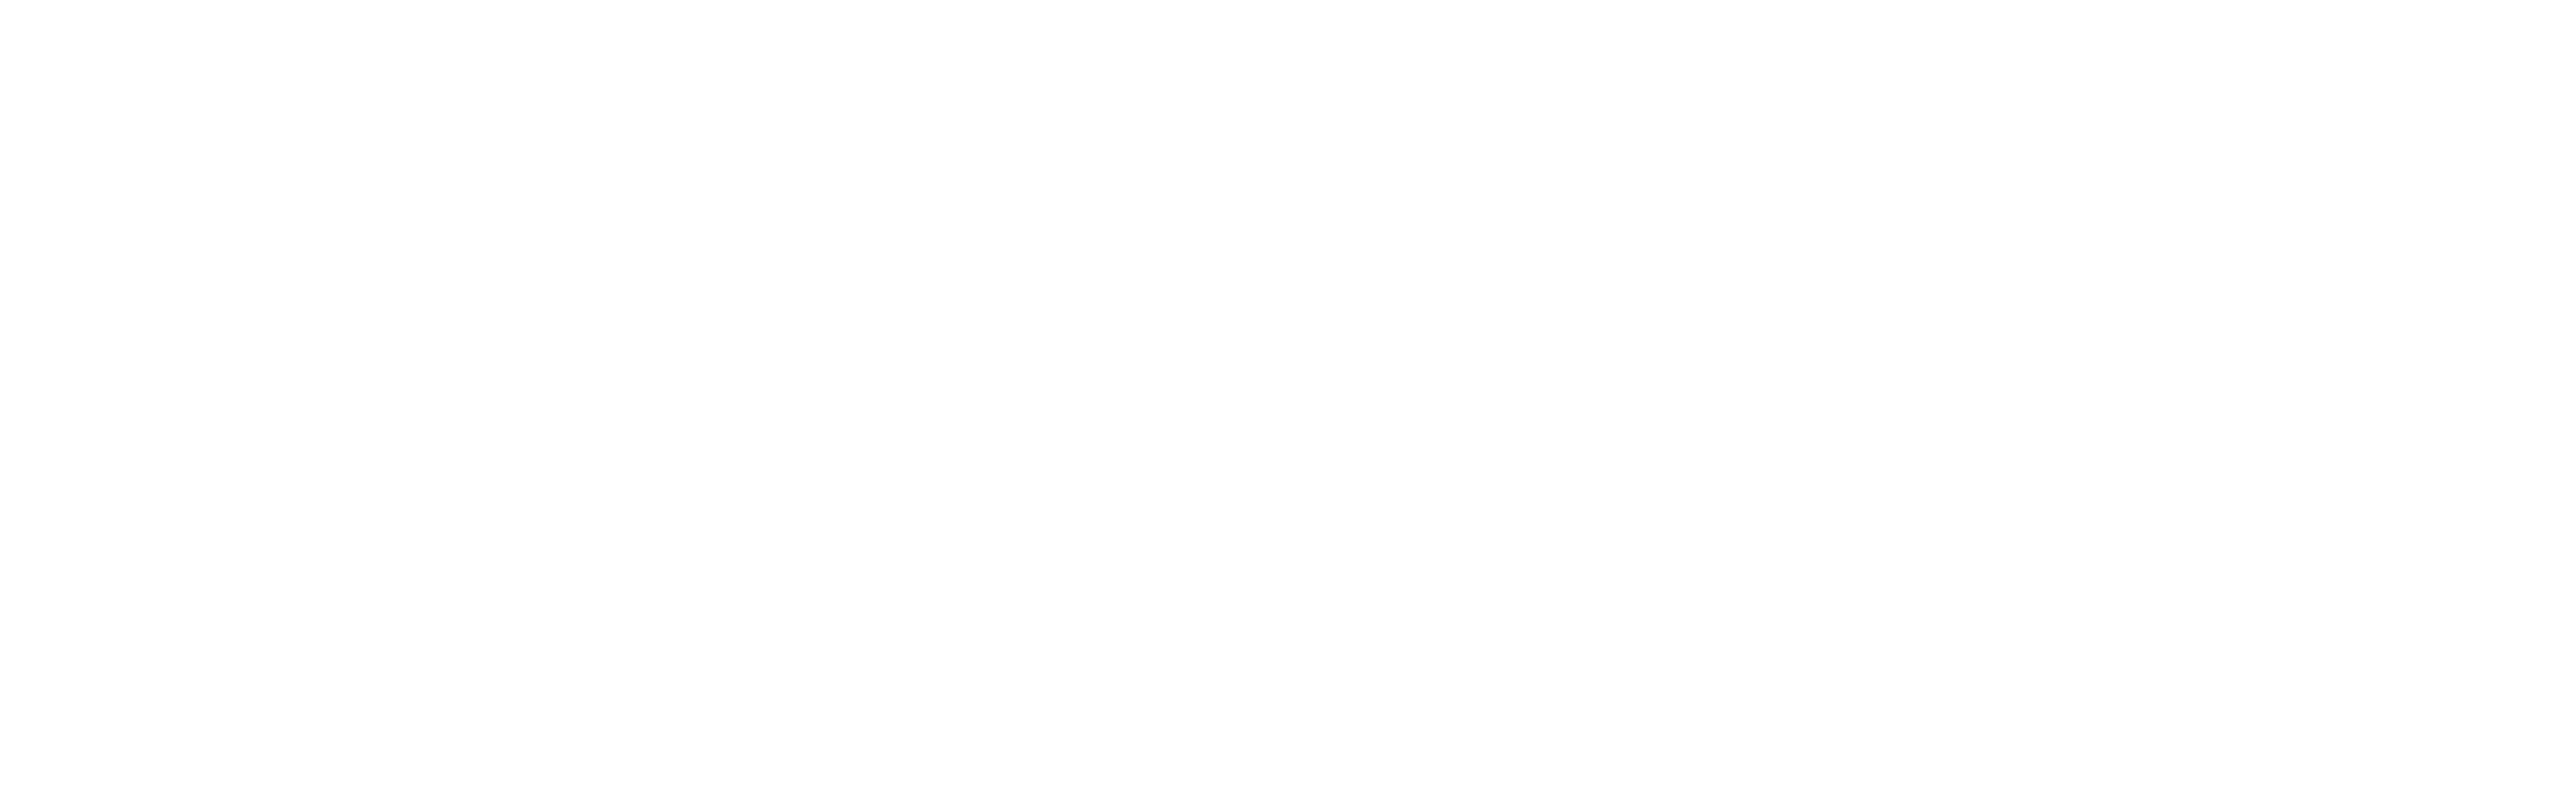 Certified Indigenous Business